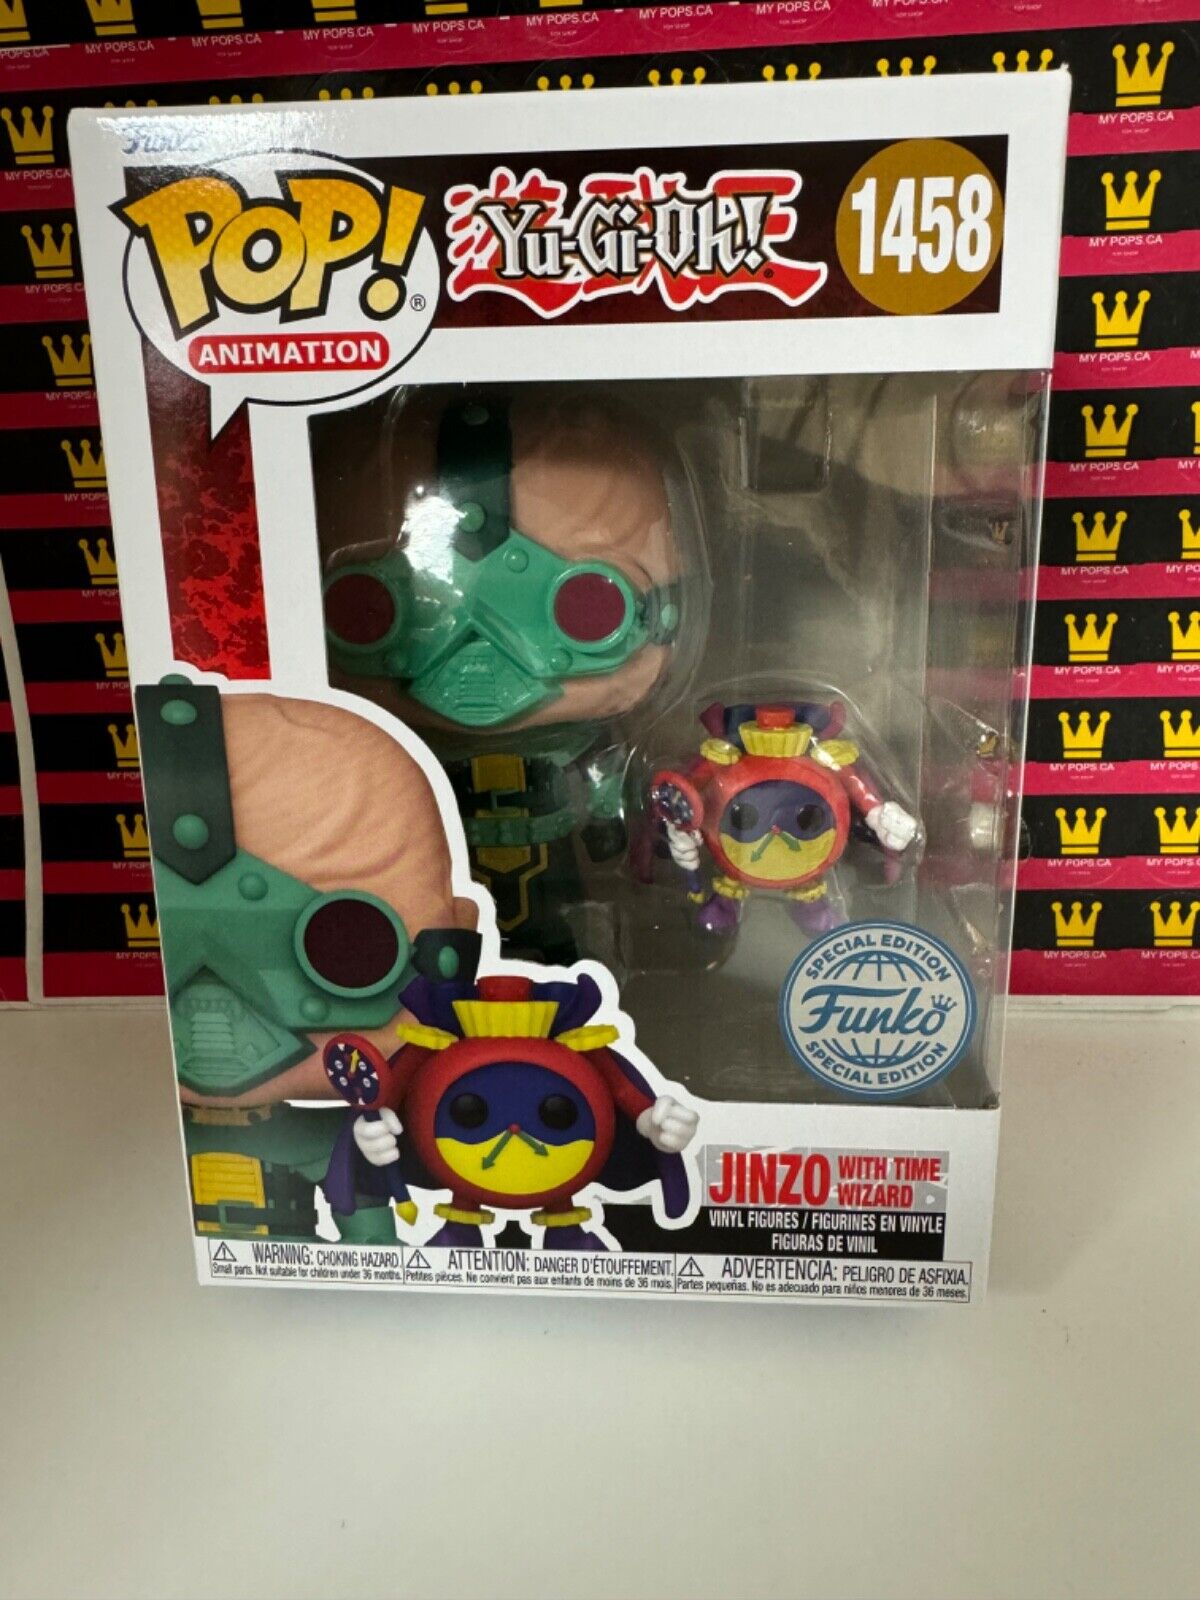 **IN HAND** CANADA EXCLUSIVE Funko Pop YUGIOH JINZO WITH TIME WIZARD #1458